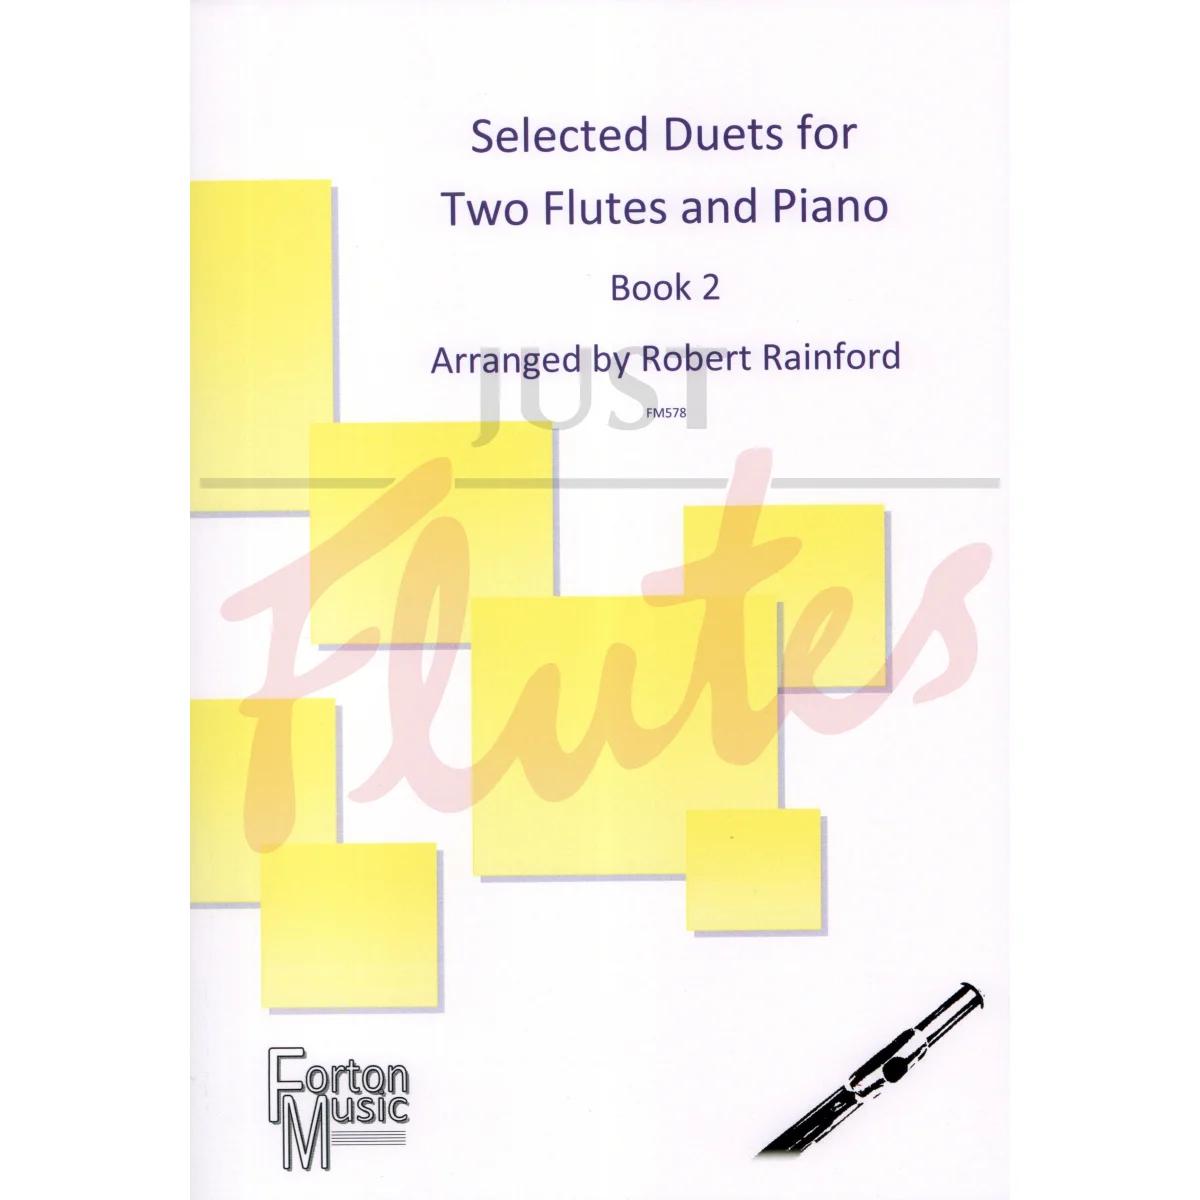 Selected Duets for Two Flutes and Piano, Book 2